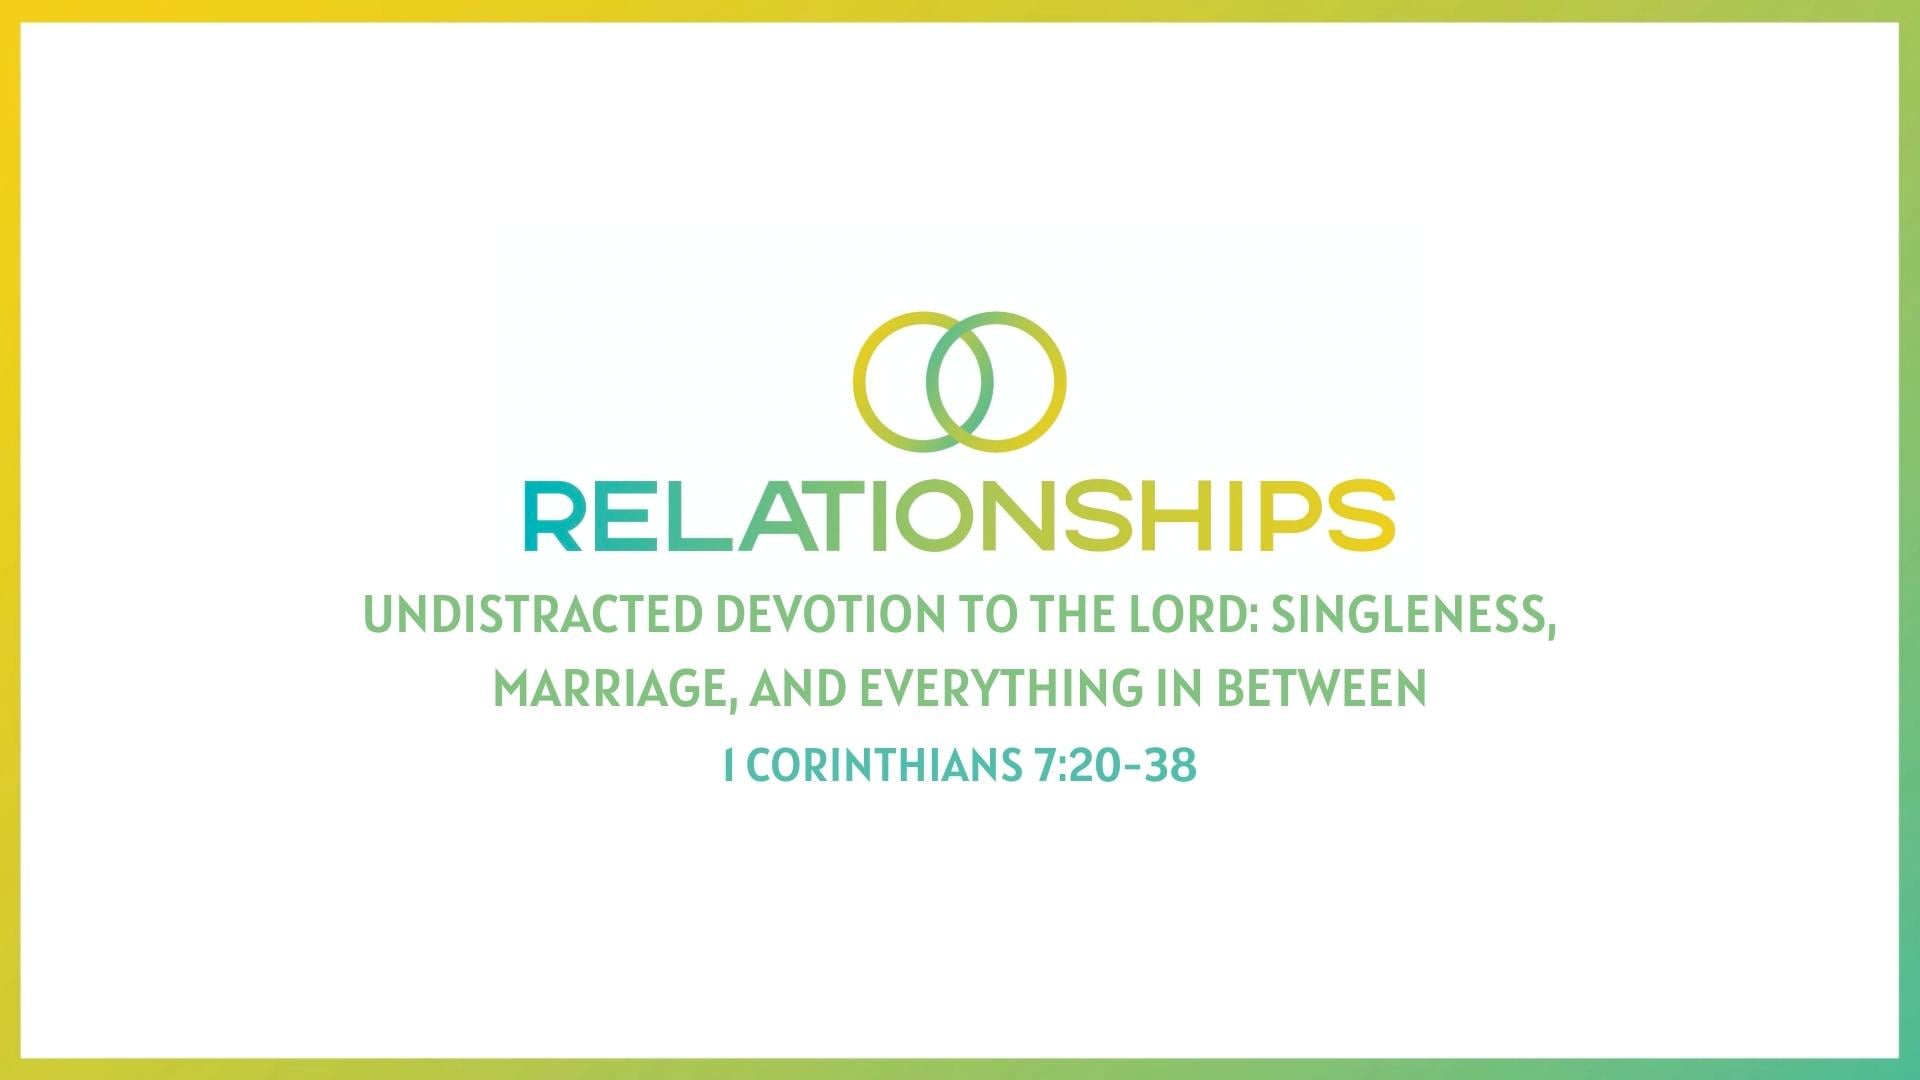 Undistracted Devotion to the Lord: Singleness, Marriage, and Everything in Between - May 15, 2022